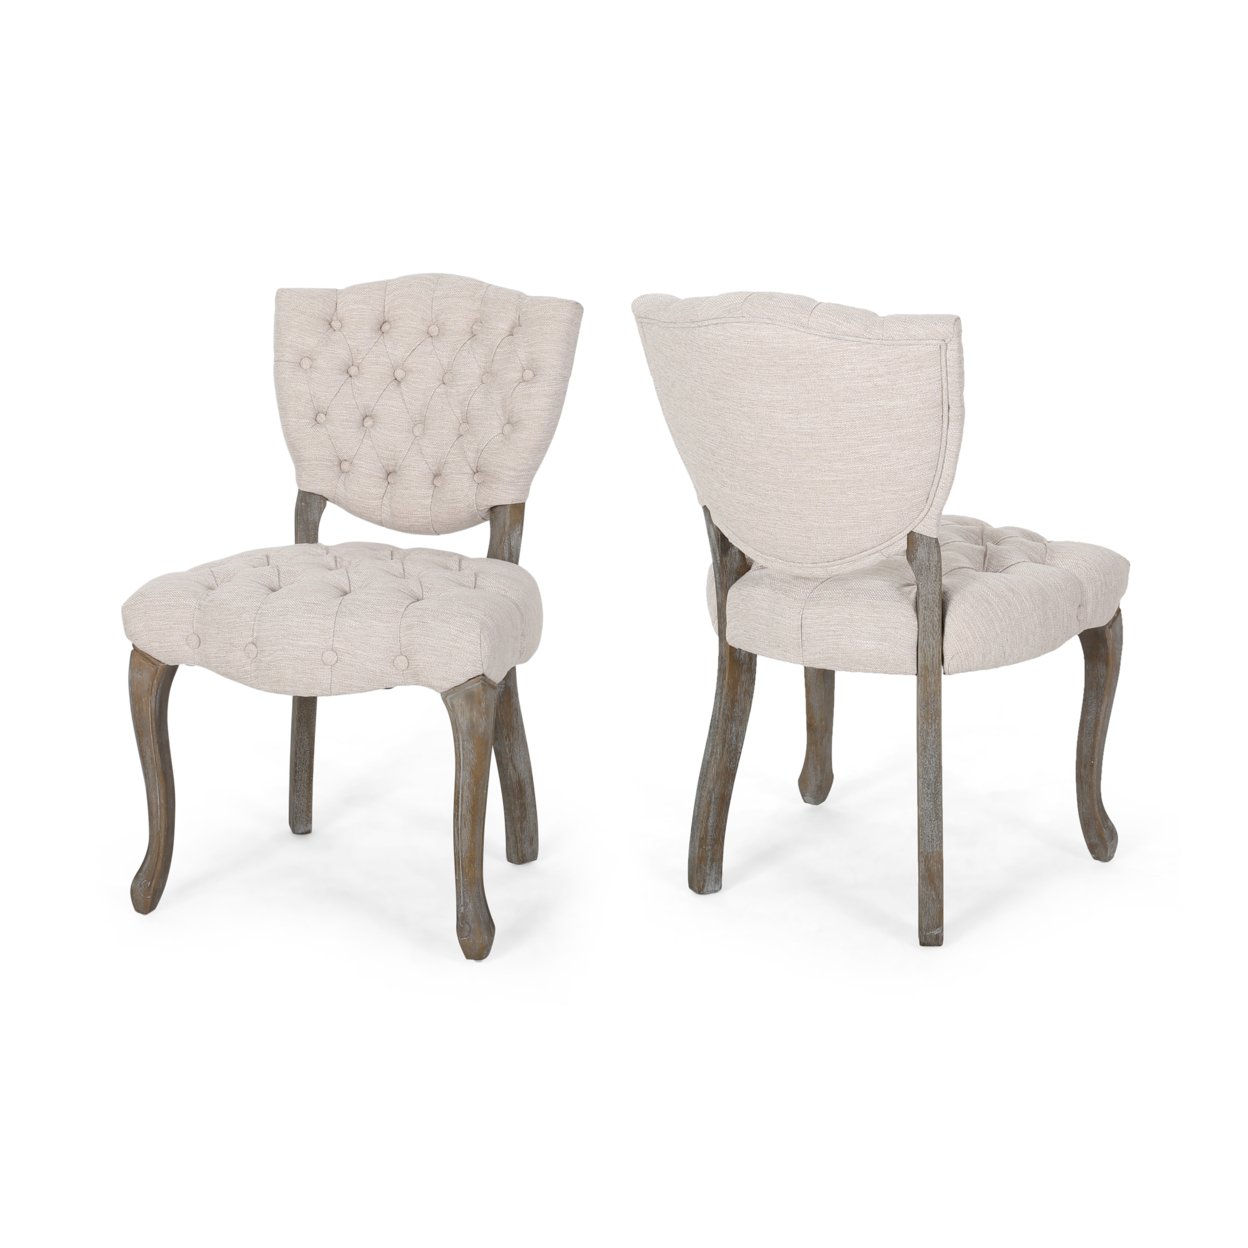 Case Tufted Dining Chair With Cabriole Legs (Set Of 2) - Teal + Brown Wash Finish